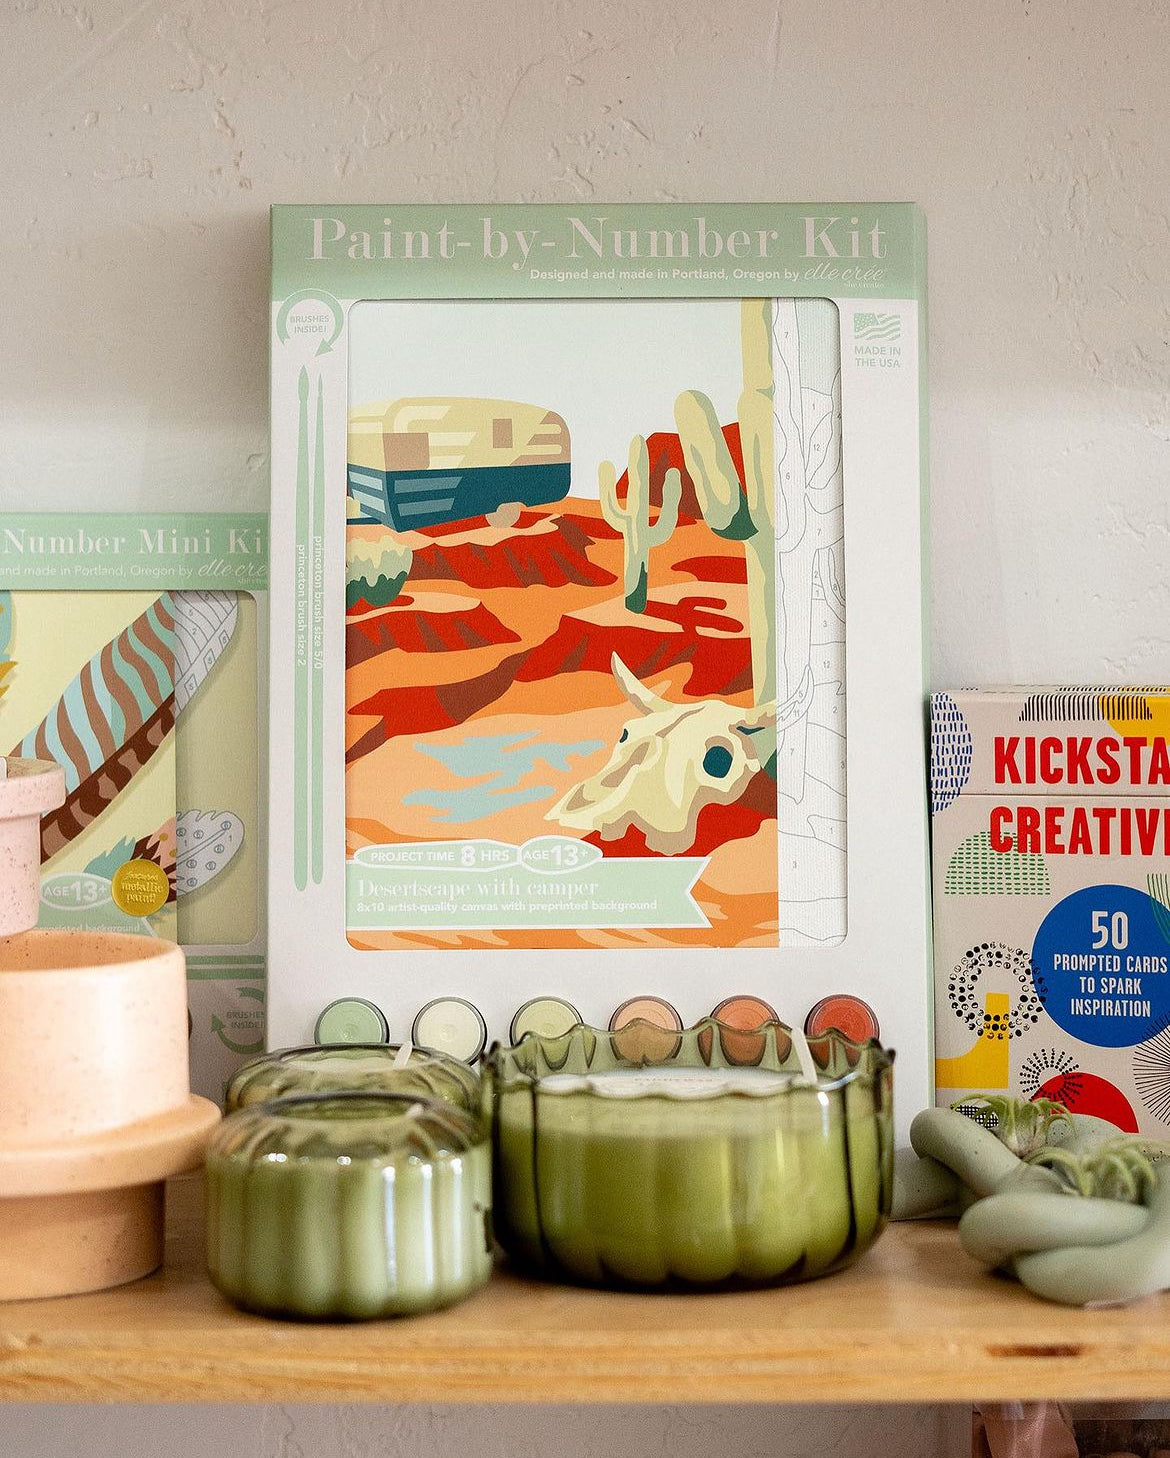 Desertscape paint-by-number kit on a merchandising display at Small Batch Store.